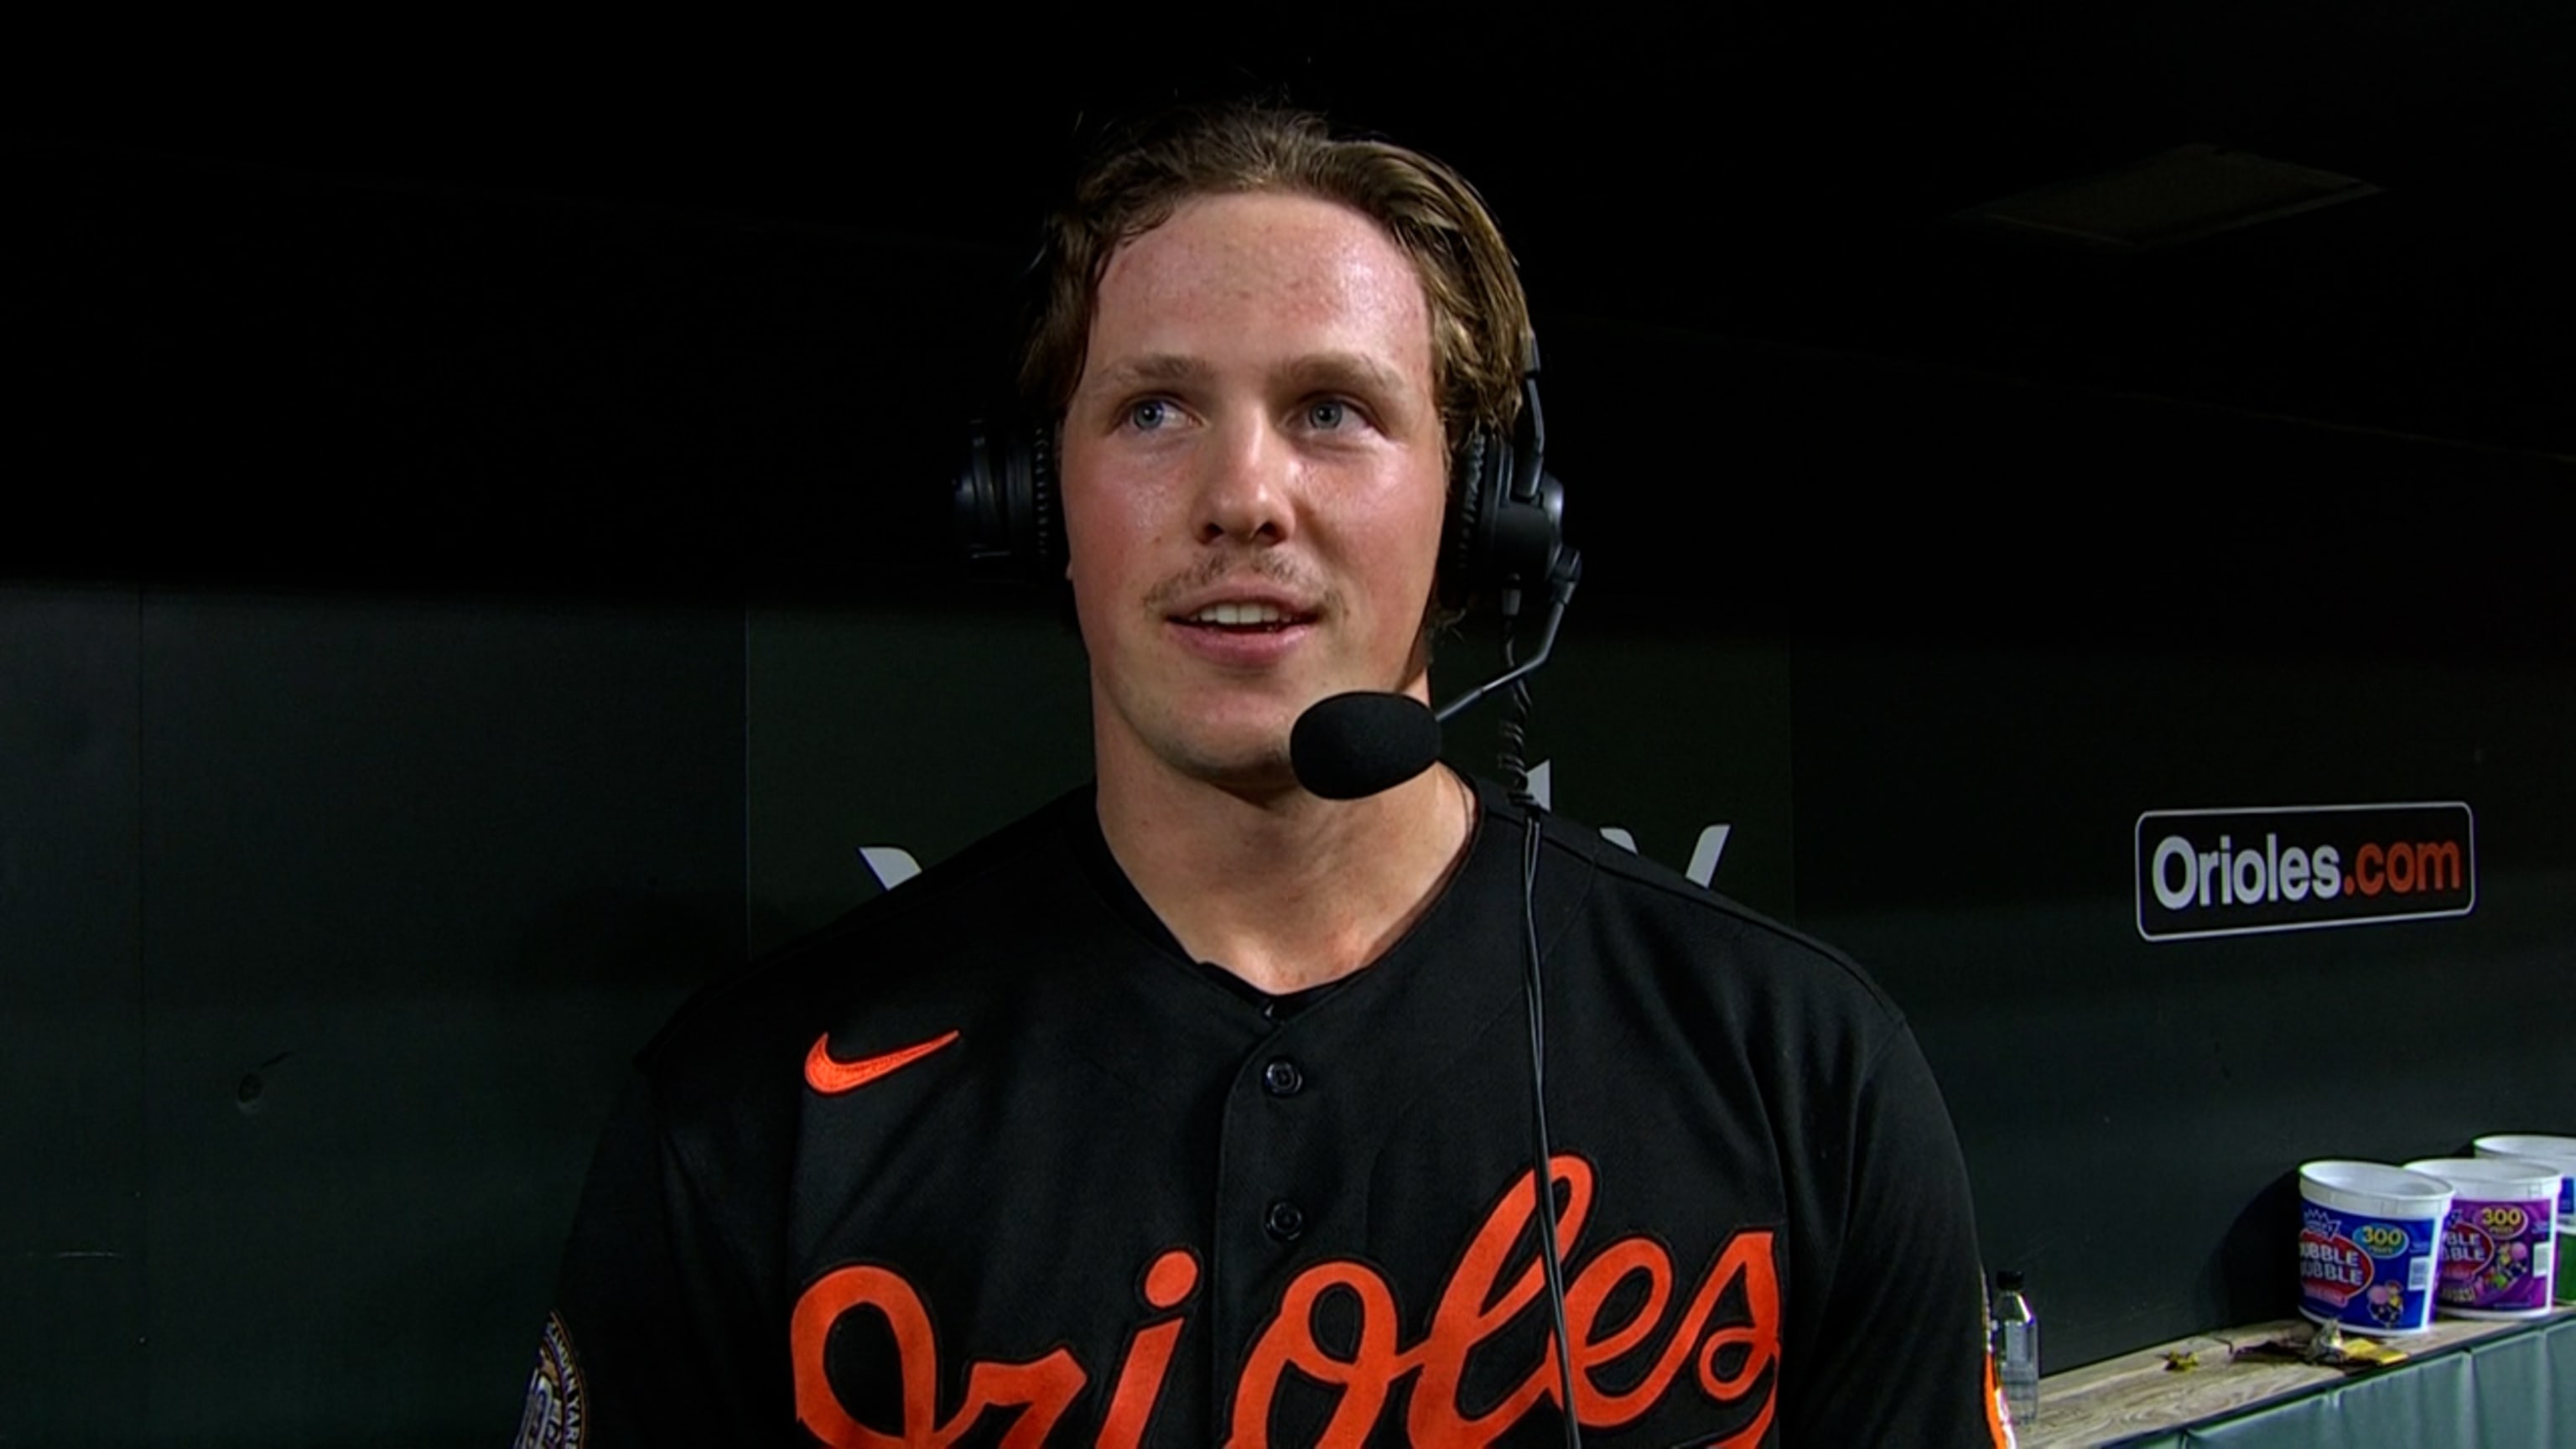 Adley Rutschman is so consistent he's almost 'boring'. That's what the  Orioles love about him.